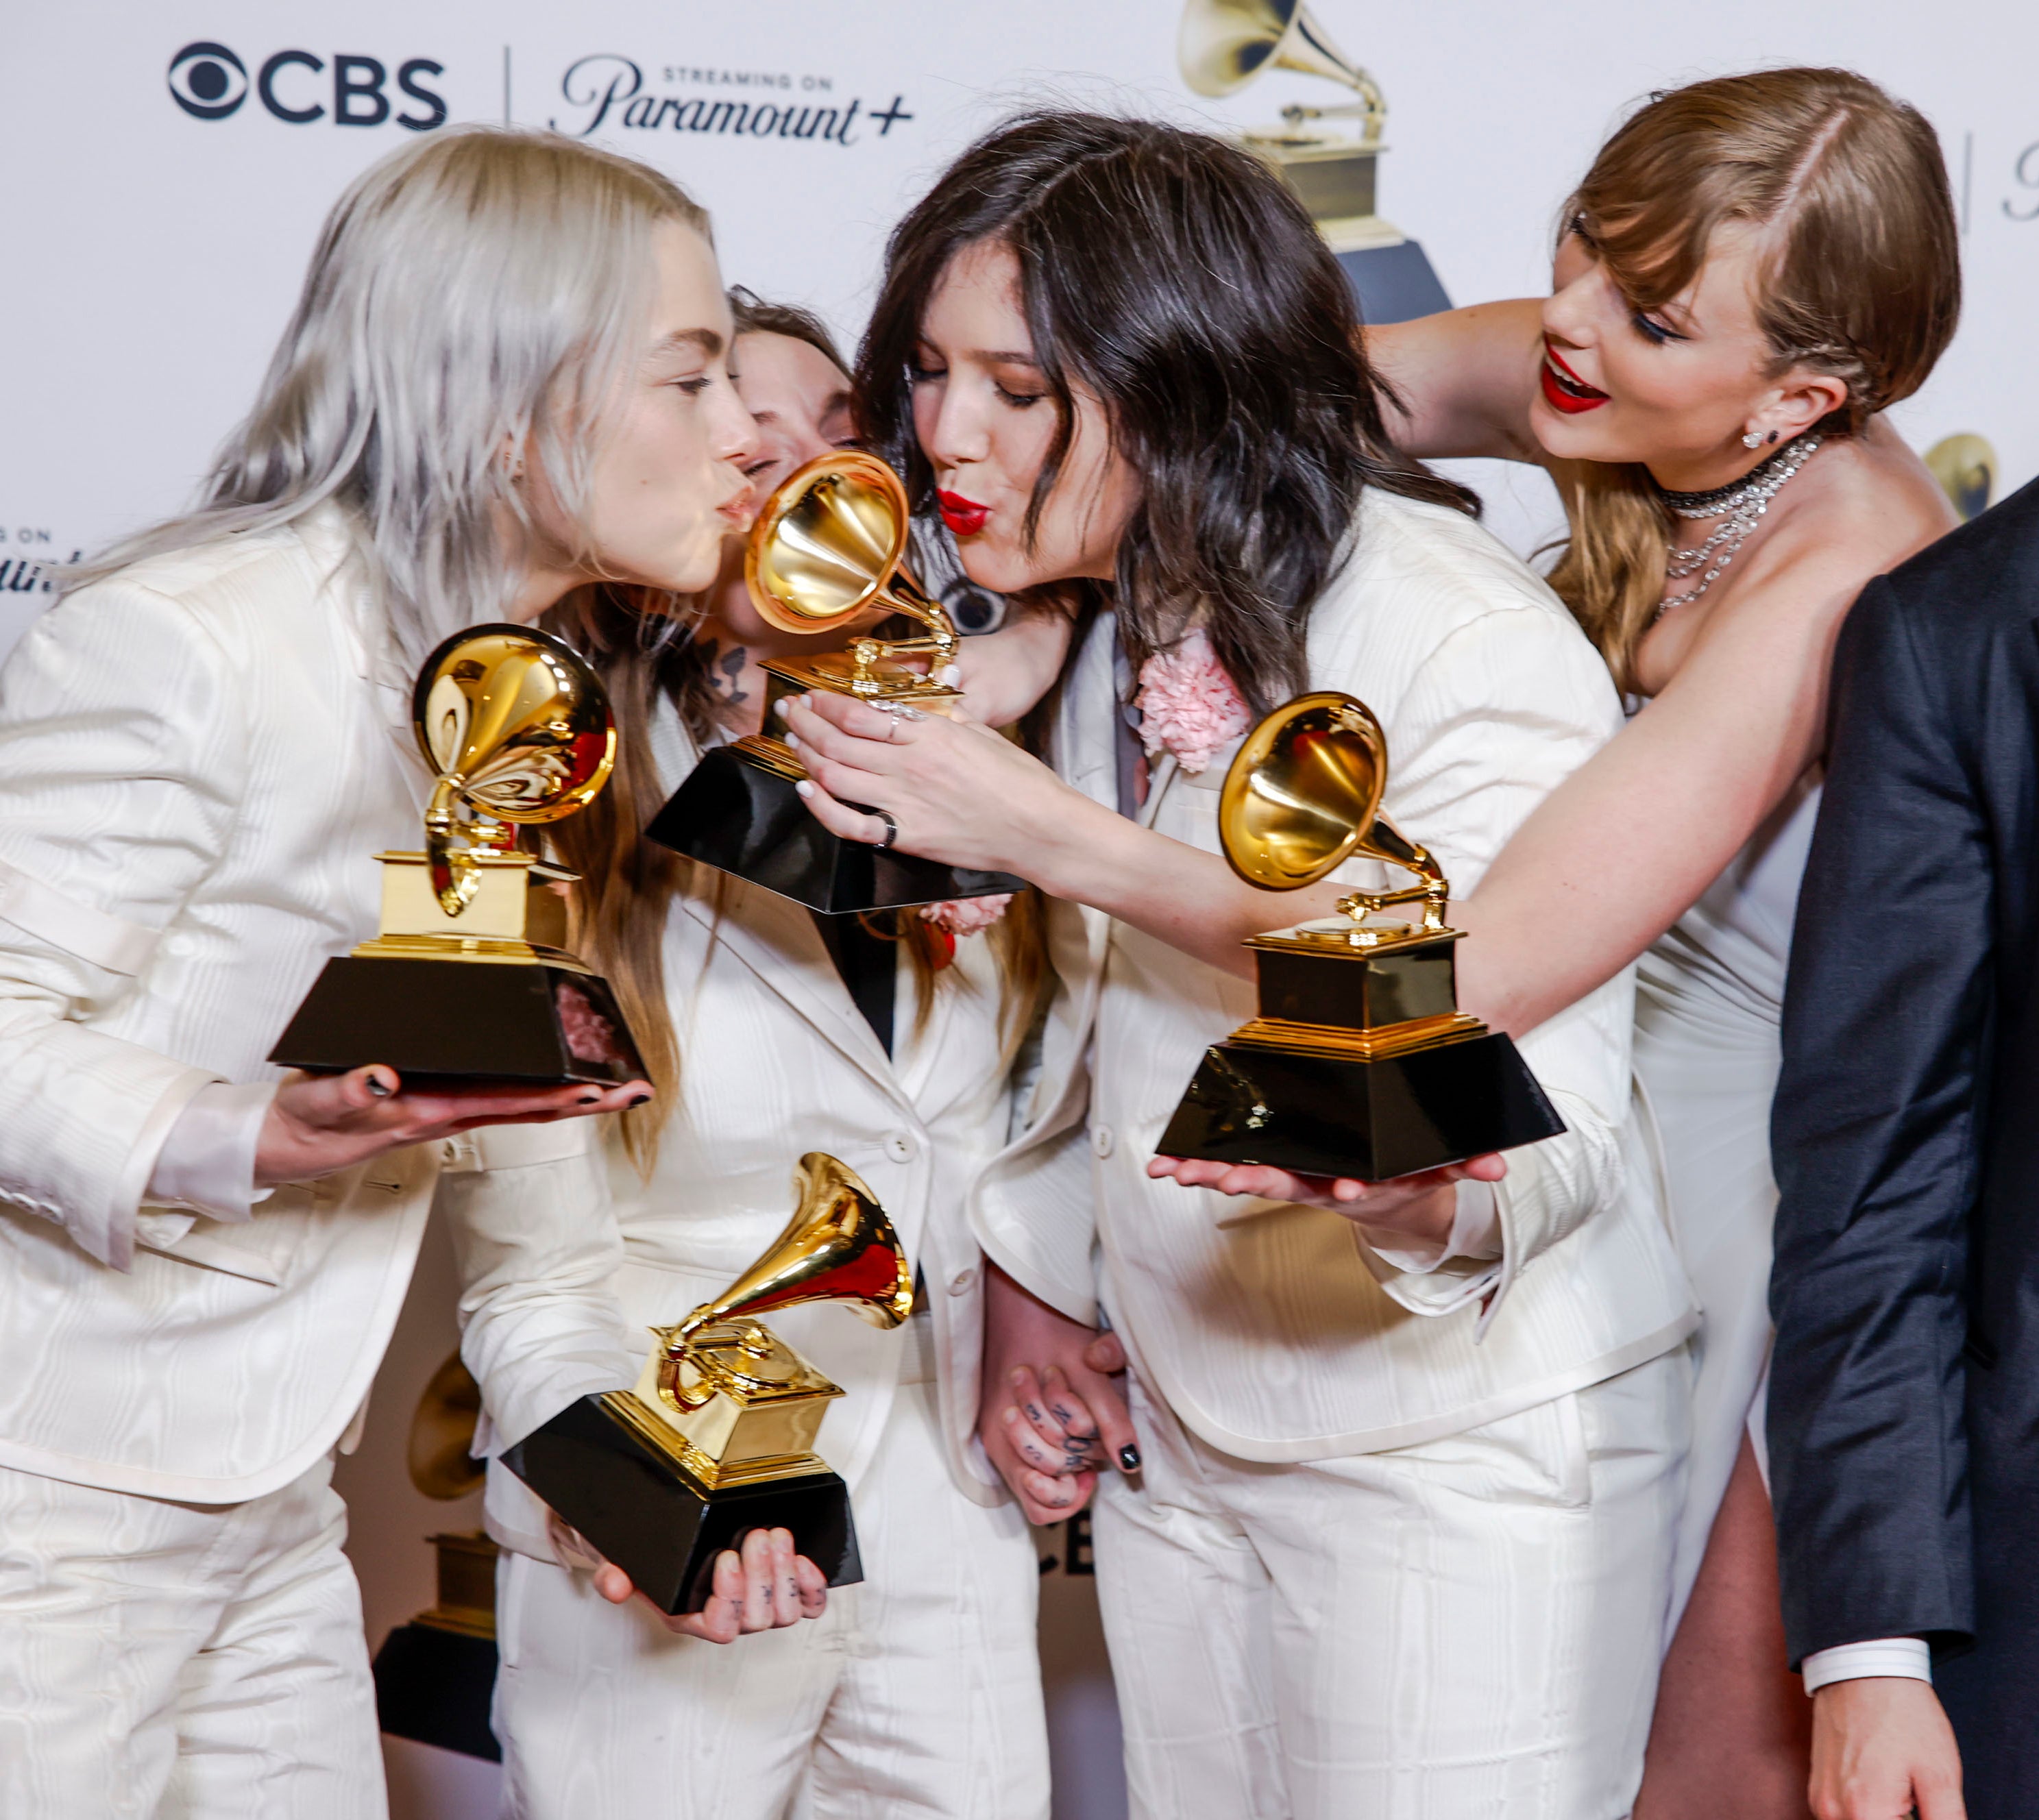 Boygenius holding their Grammys with Taylor Swift helping